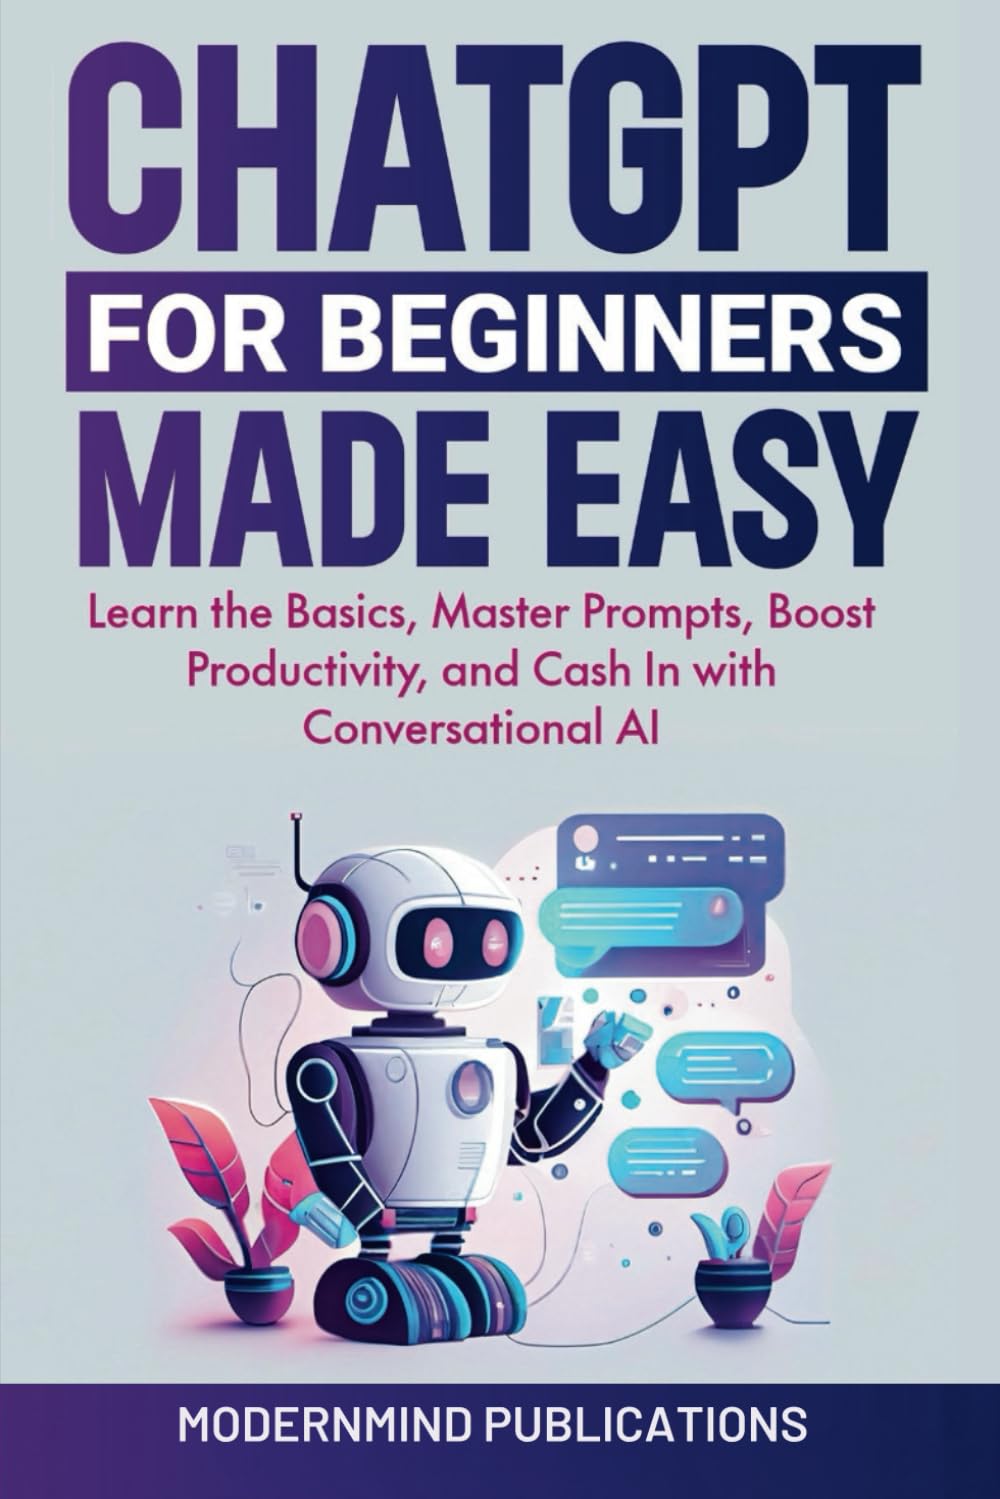 ChatGPT for Beginners Made Easy: Learn the Basics, Master Prompts, Boost Productivity, and Cash In With Conversational AI